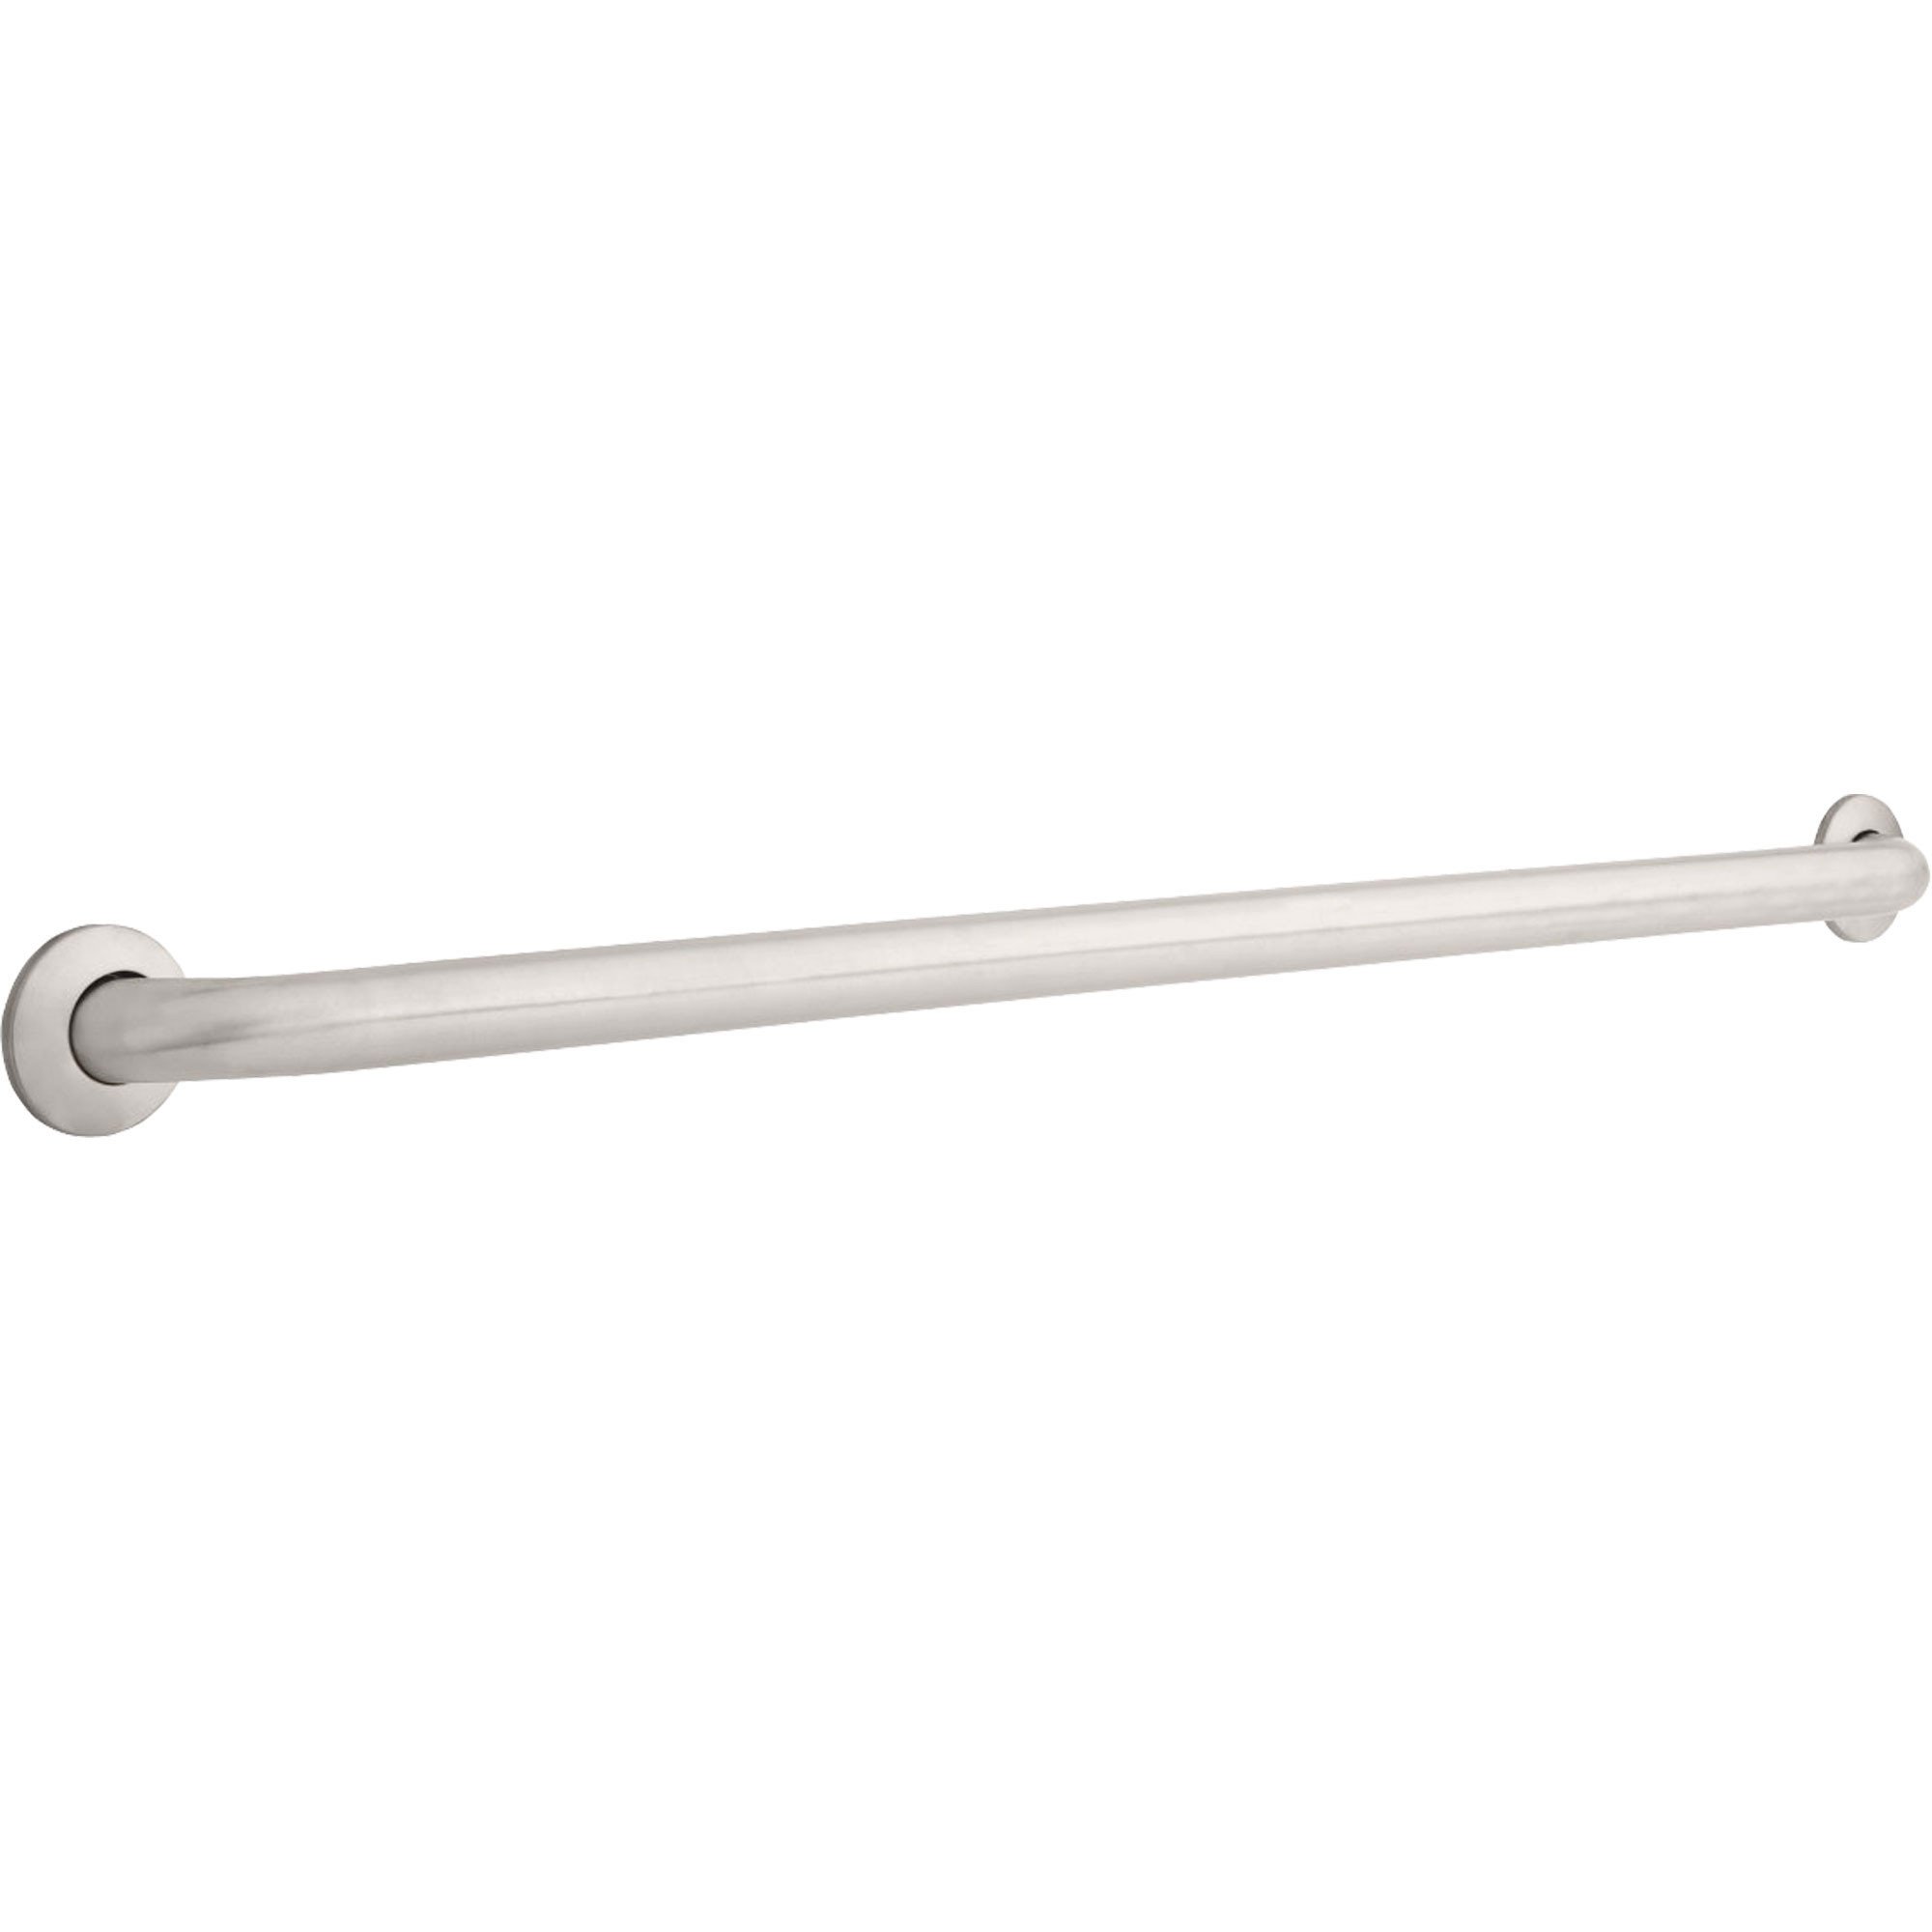 Delta ADA Complaint 1.5" x 42" Concealed Mount Grab Bar in Stainless 567682